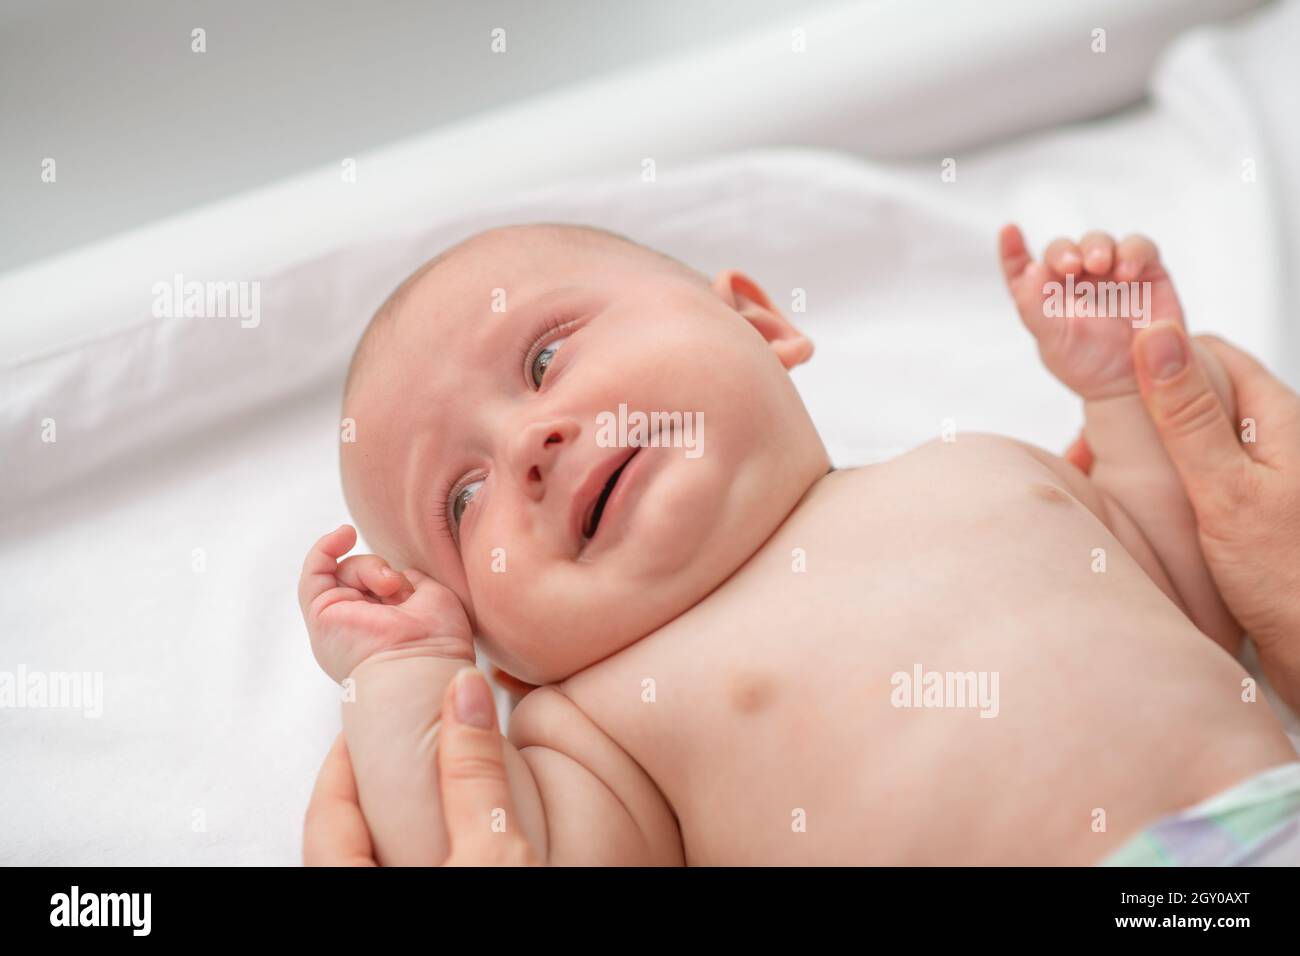 Calm newborn baby being examined by a certified healthcare professional Stock Photo